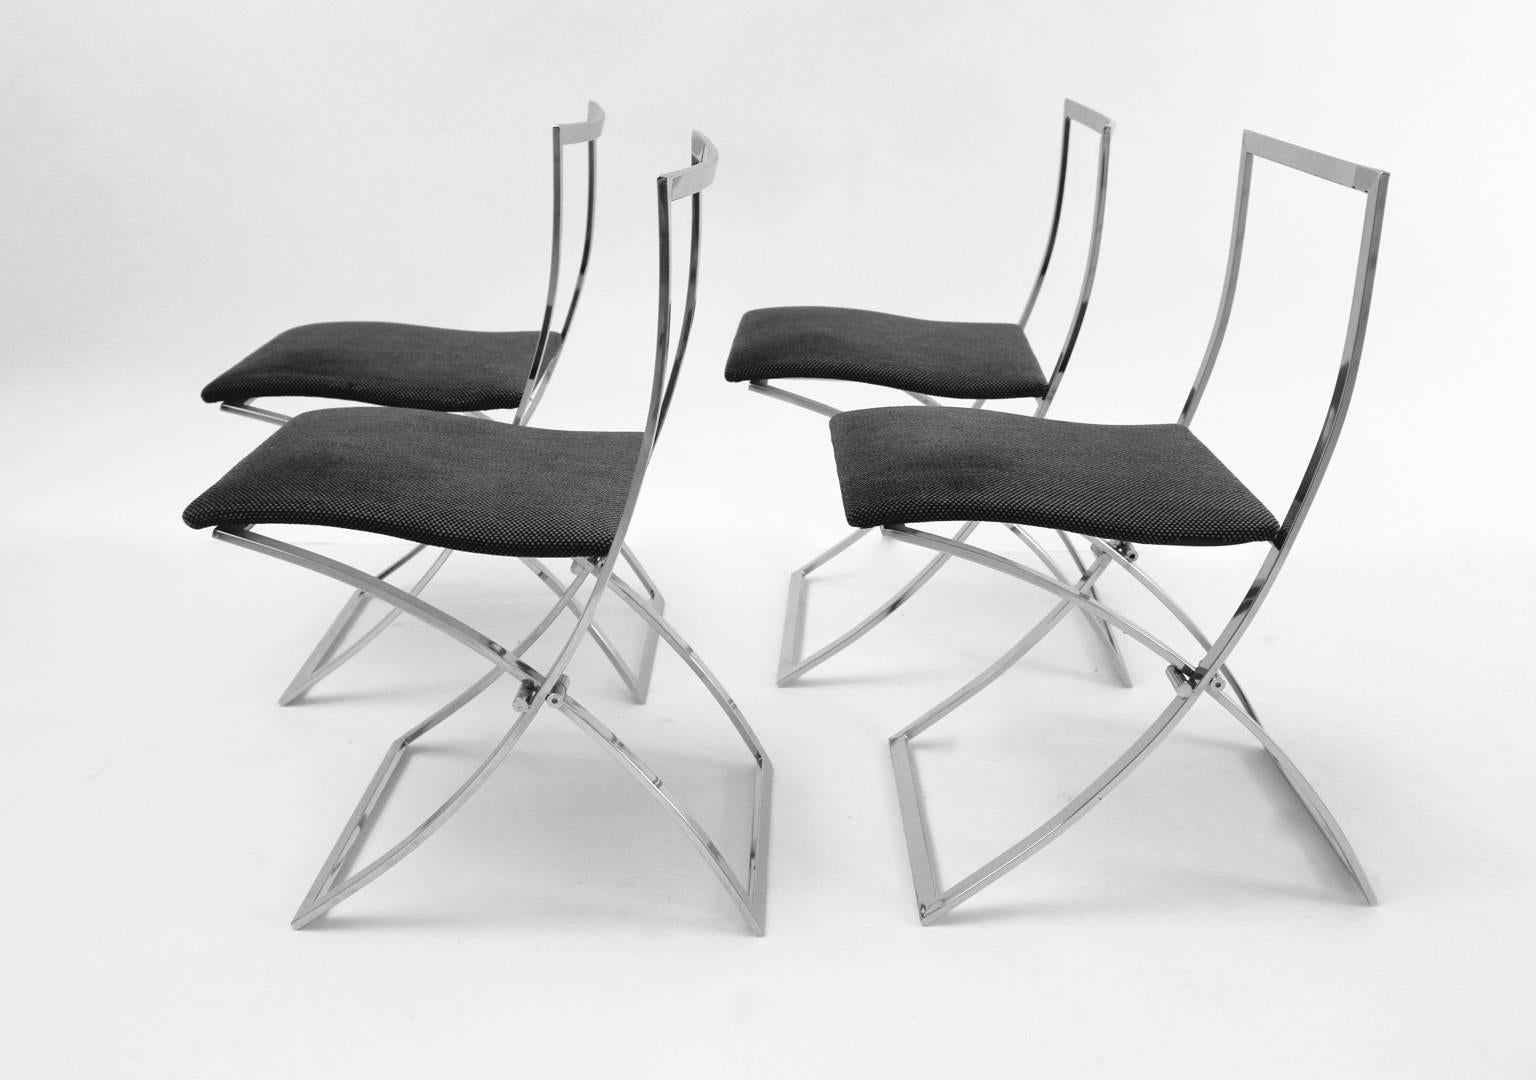 Mid century modern vintage set of 4 chairs designed by Marcello Cuneo 1970s Italy and produced by Mobel.
The frame of the foldable chairs is chrome-plated and the upholstery is covered with dark-grey high-quality textile fabric.
The vintage